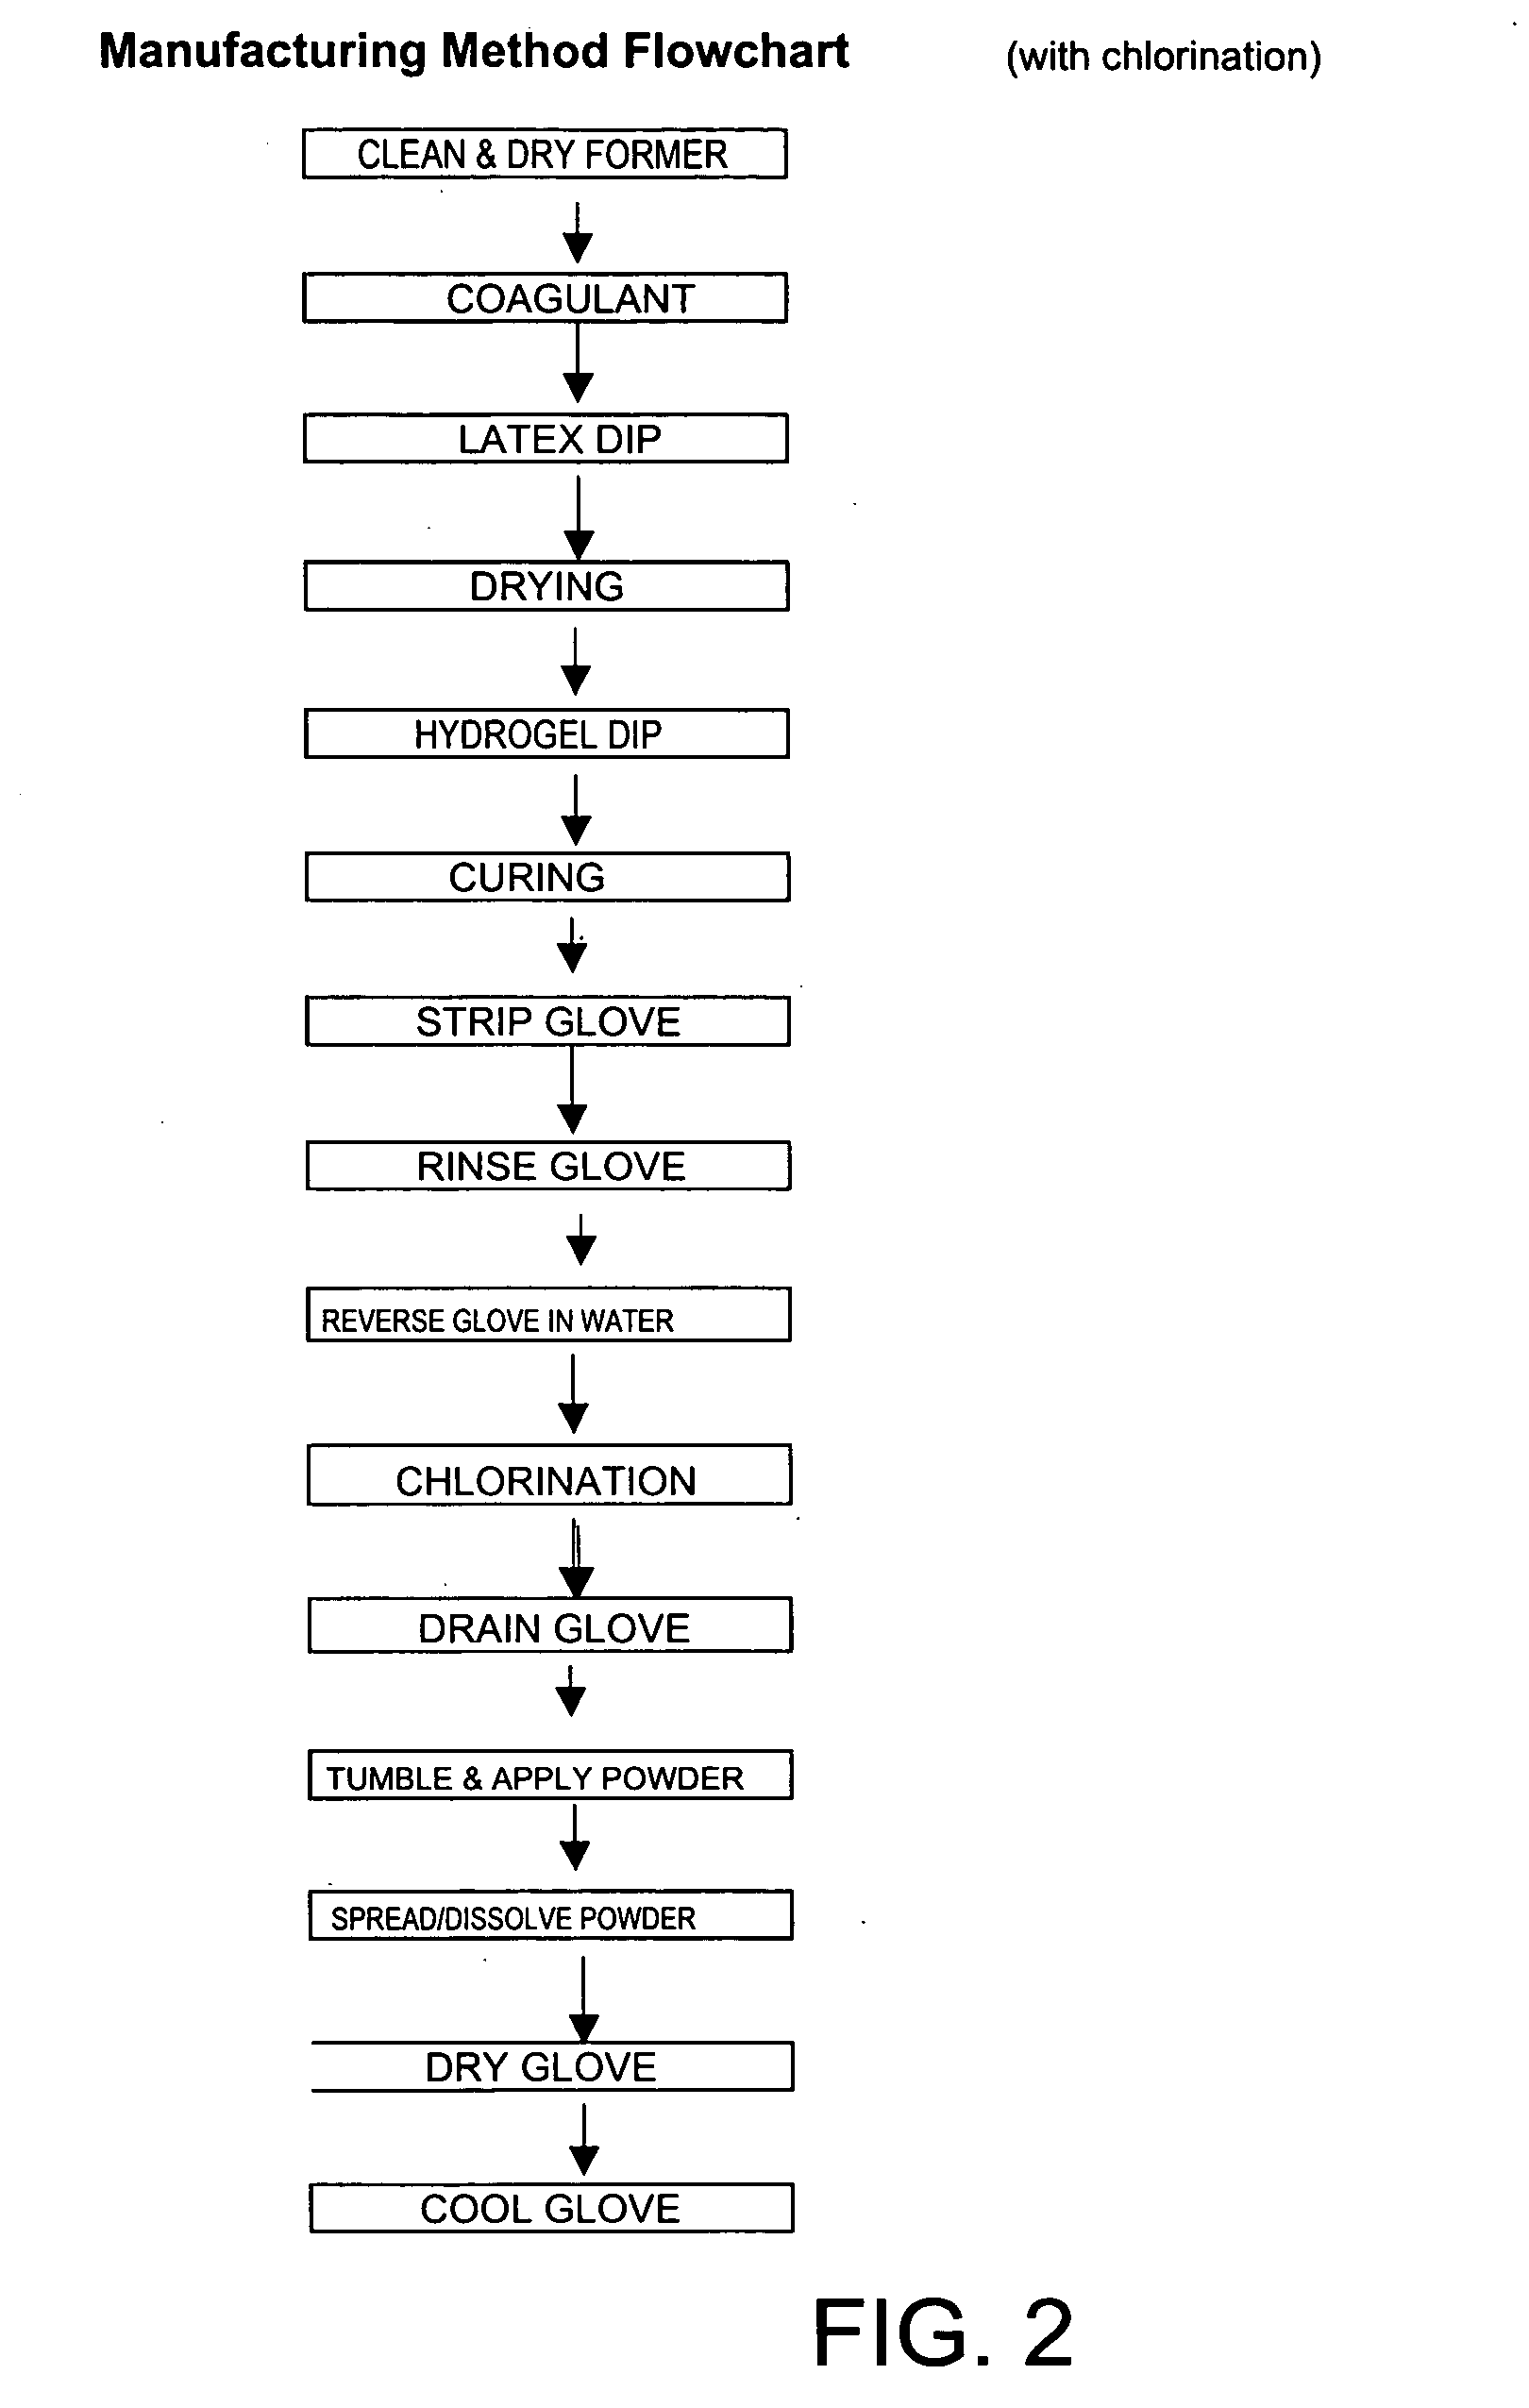 Skin-care protective gloves and manufacturing method